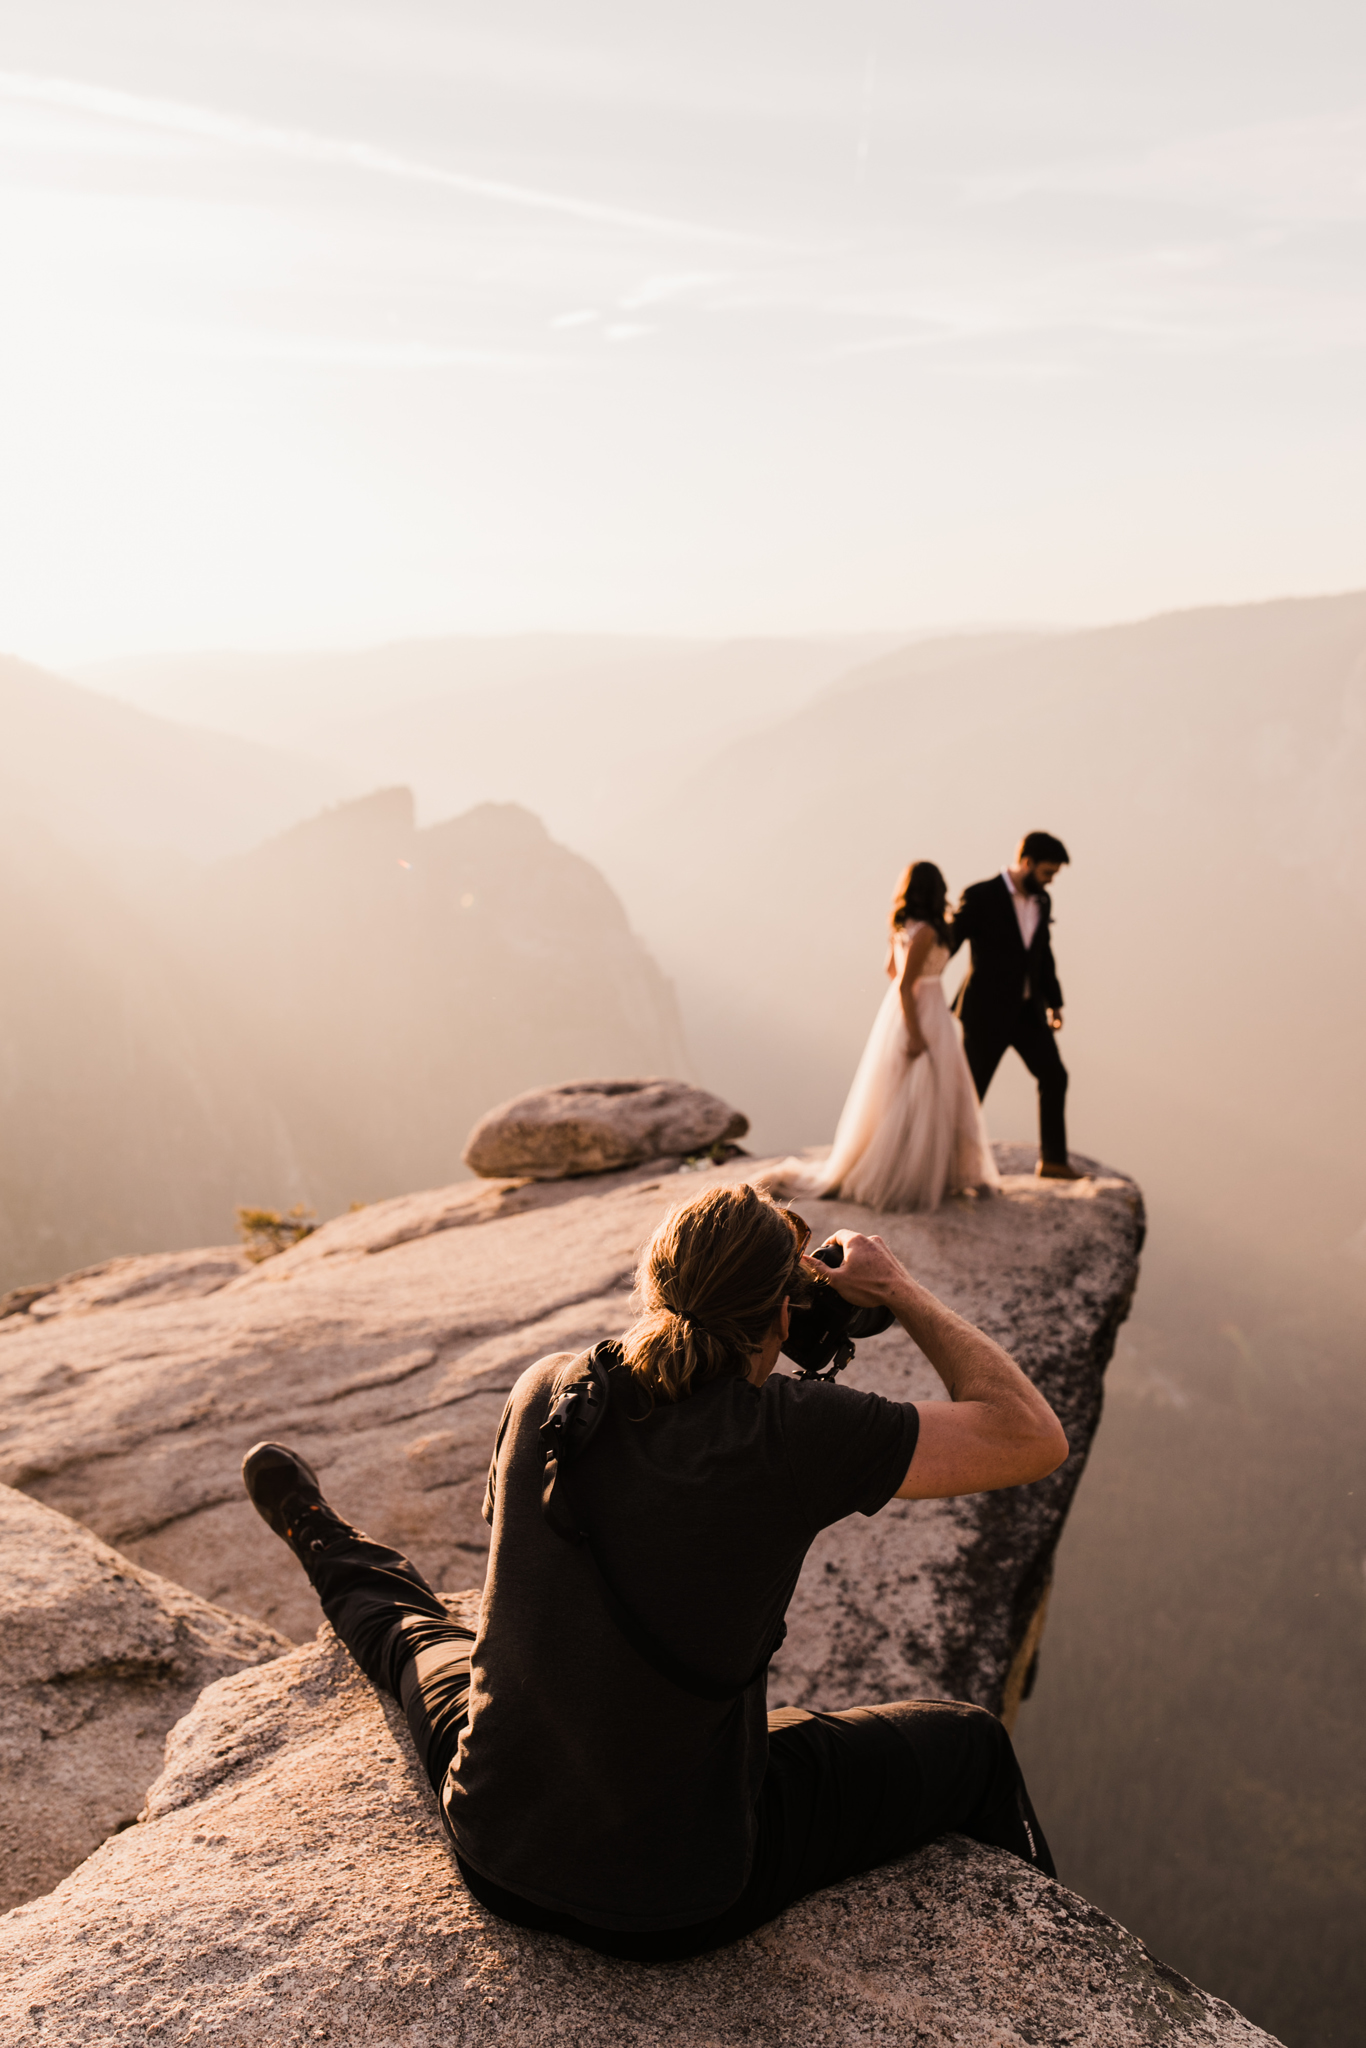 photographing an elopement in yosemite national park | utah and california adventure elopement photographers | the hearnes adventure photography | www.thehearnes.com